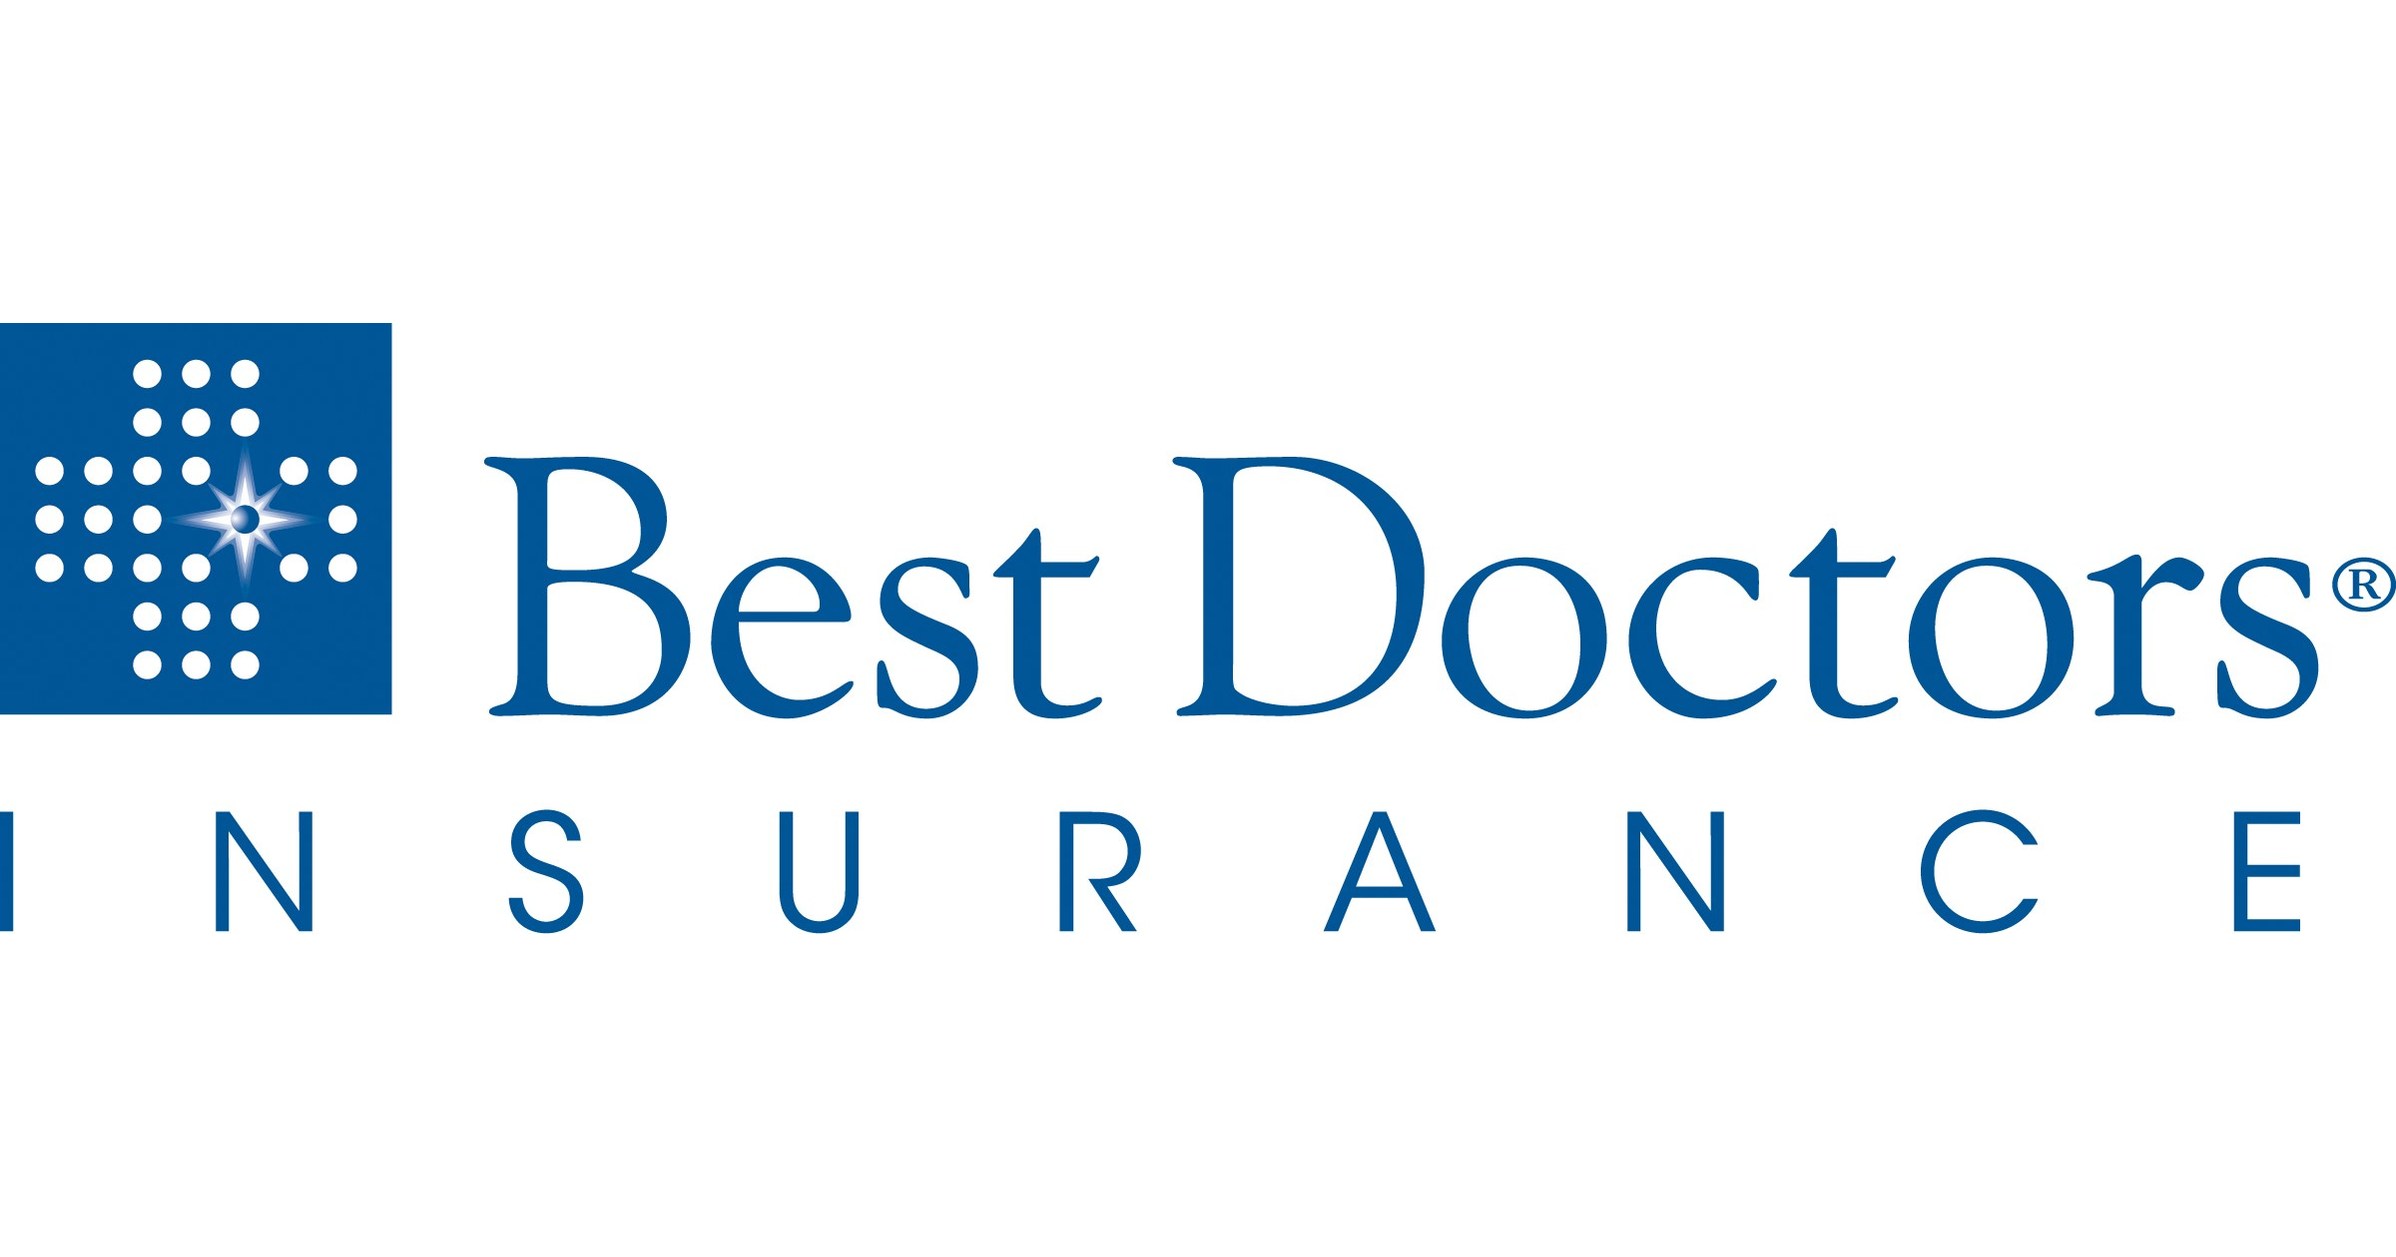 Best Doctors Insurance Launches New Website for 2020